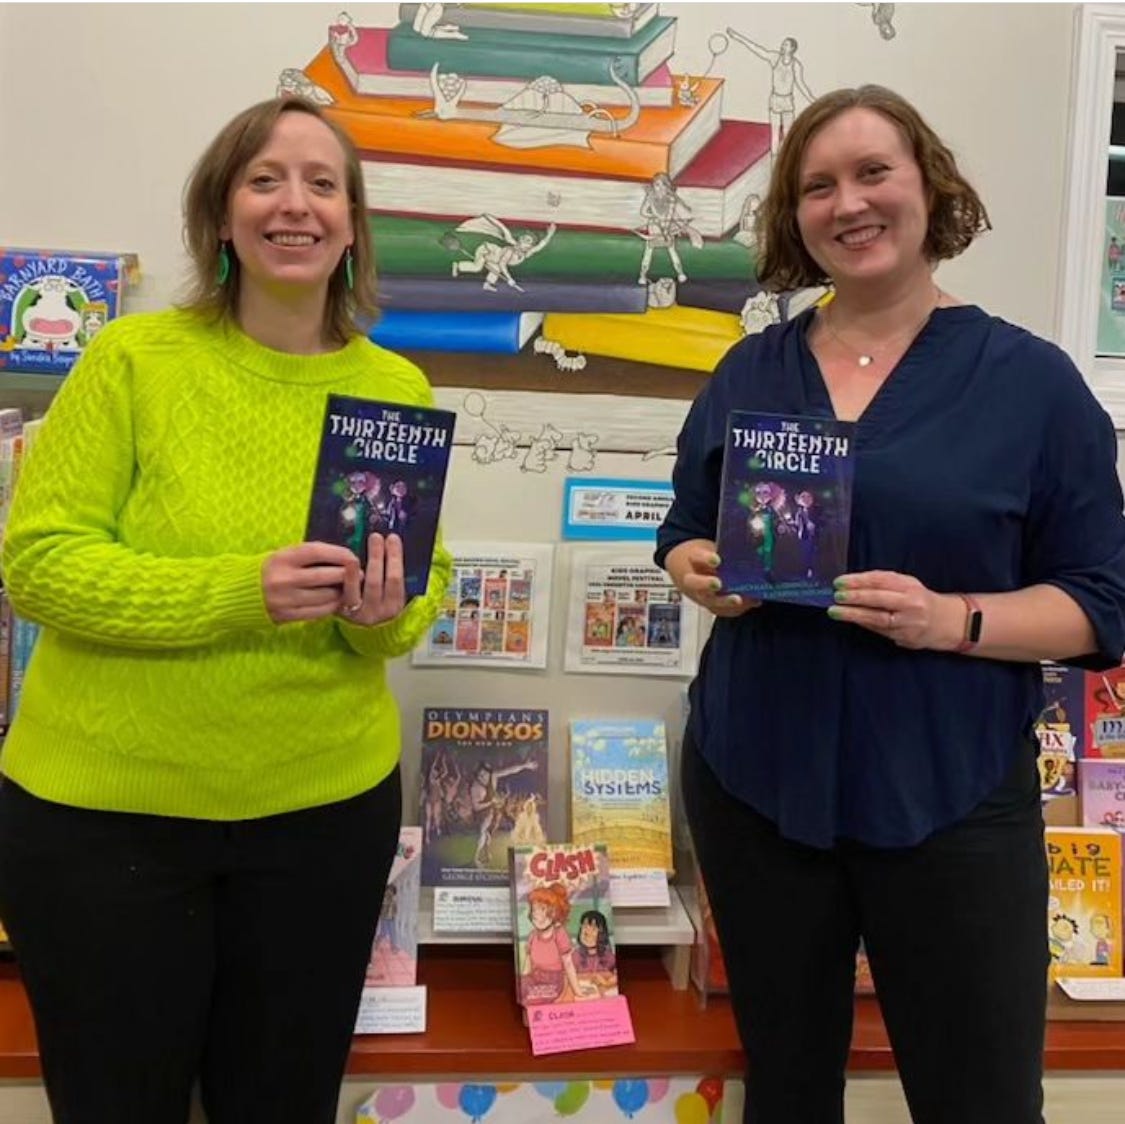 MarcyKate and Kathryn pose with finished copies of The Thirteenth Circle. MarcyKate wears a lime-green sweater and Kathryn wears a navy-blue top, matching their book's cover design.